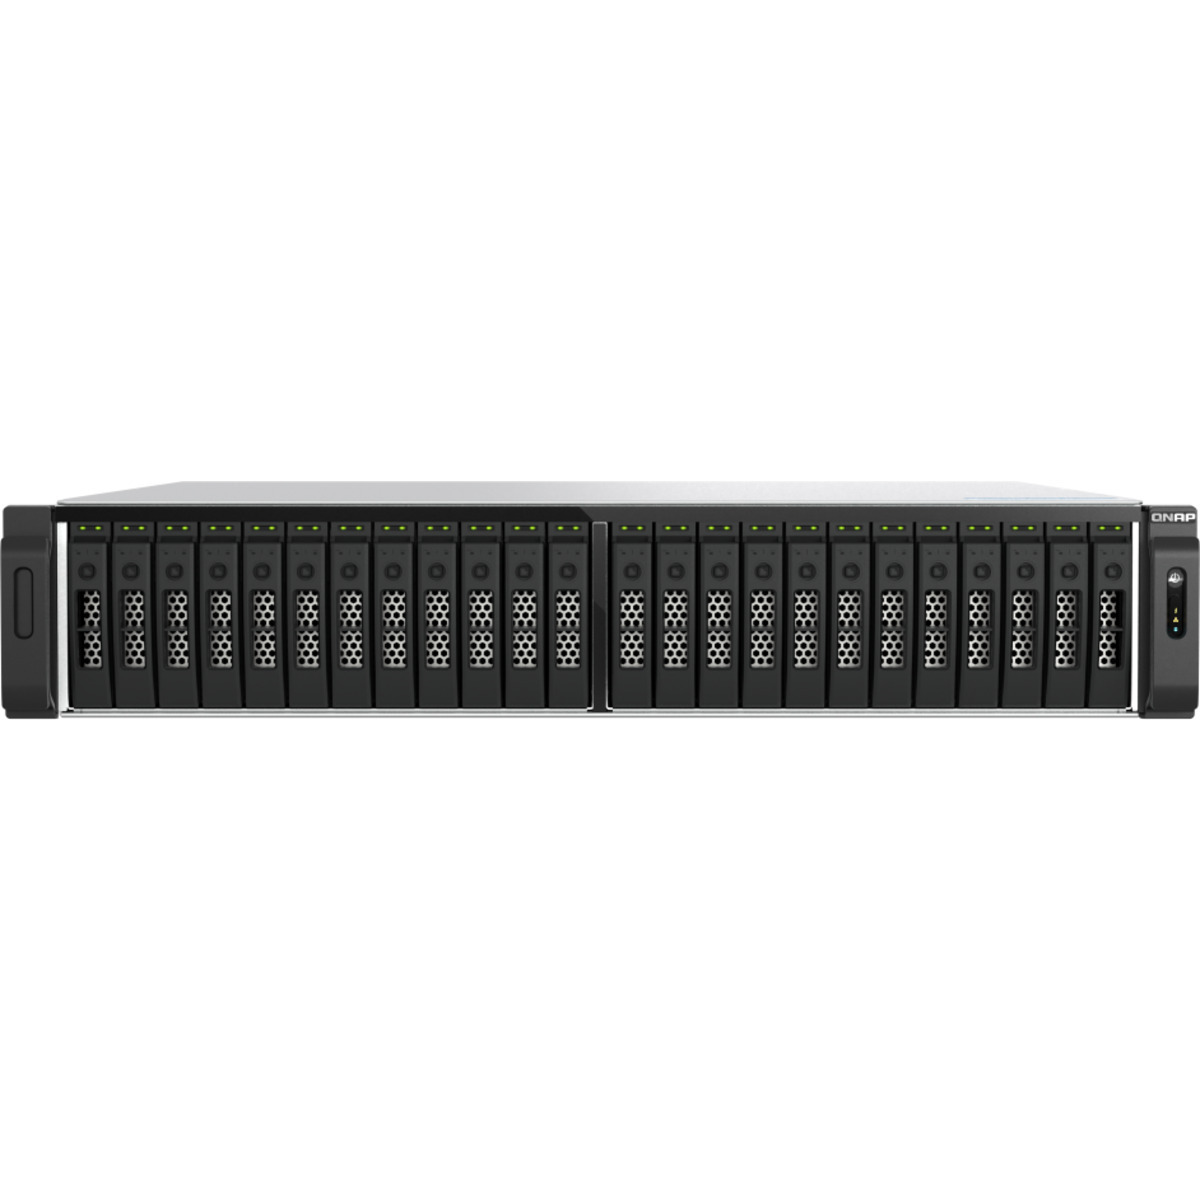 QNAP TS-h3077AFU Ryzen 5 All-Flash ZFS 56tb 30-Bay RackMount Large Business / Enterprise NAS - Network Attached Storage Device 28x2tb Sandisk Ultra 3D SDSSDH3-2T00 2.5 560/520MB/s SATA 6Gb/s SSD CONSUMER Class Drives Installed - Burn-In Tested TS-h3077AFU Ryzen 5 All-Flash ZFS